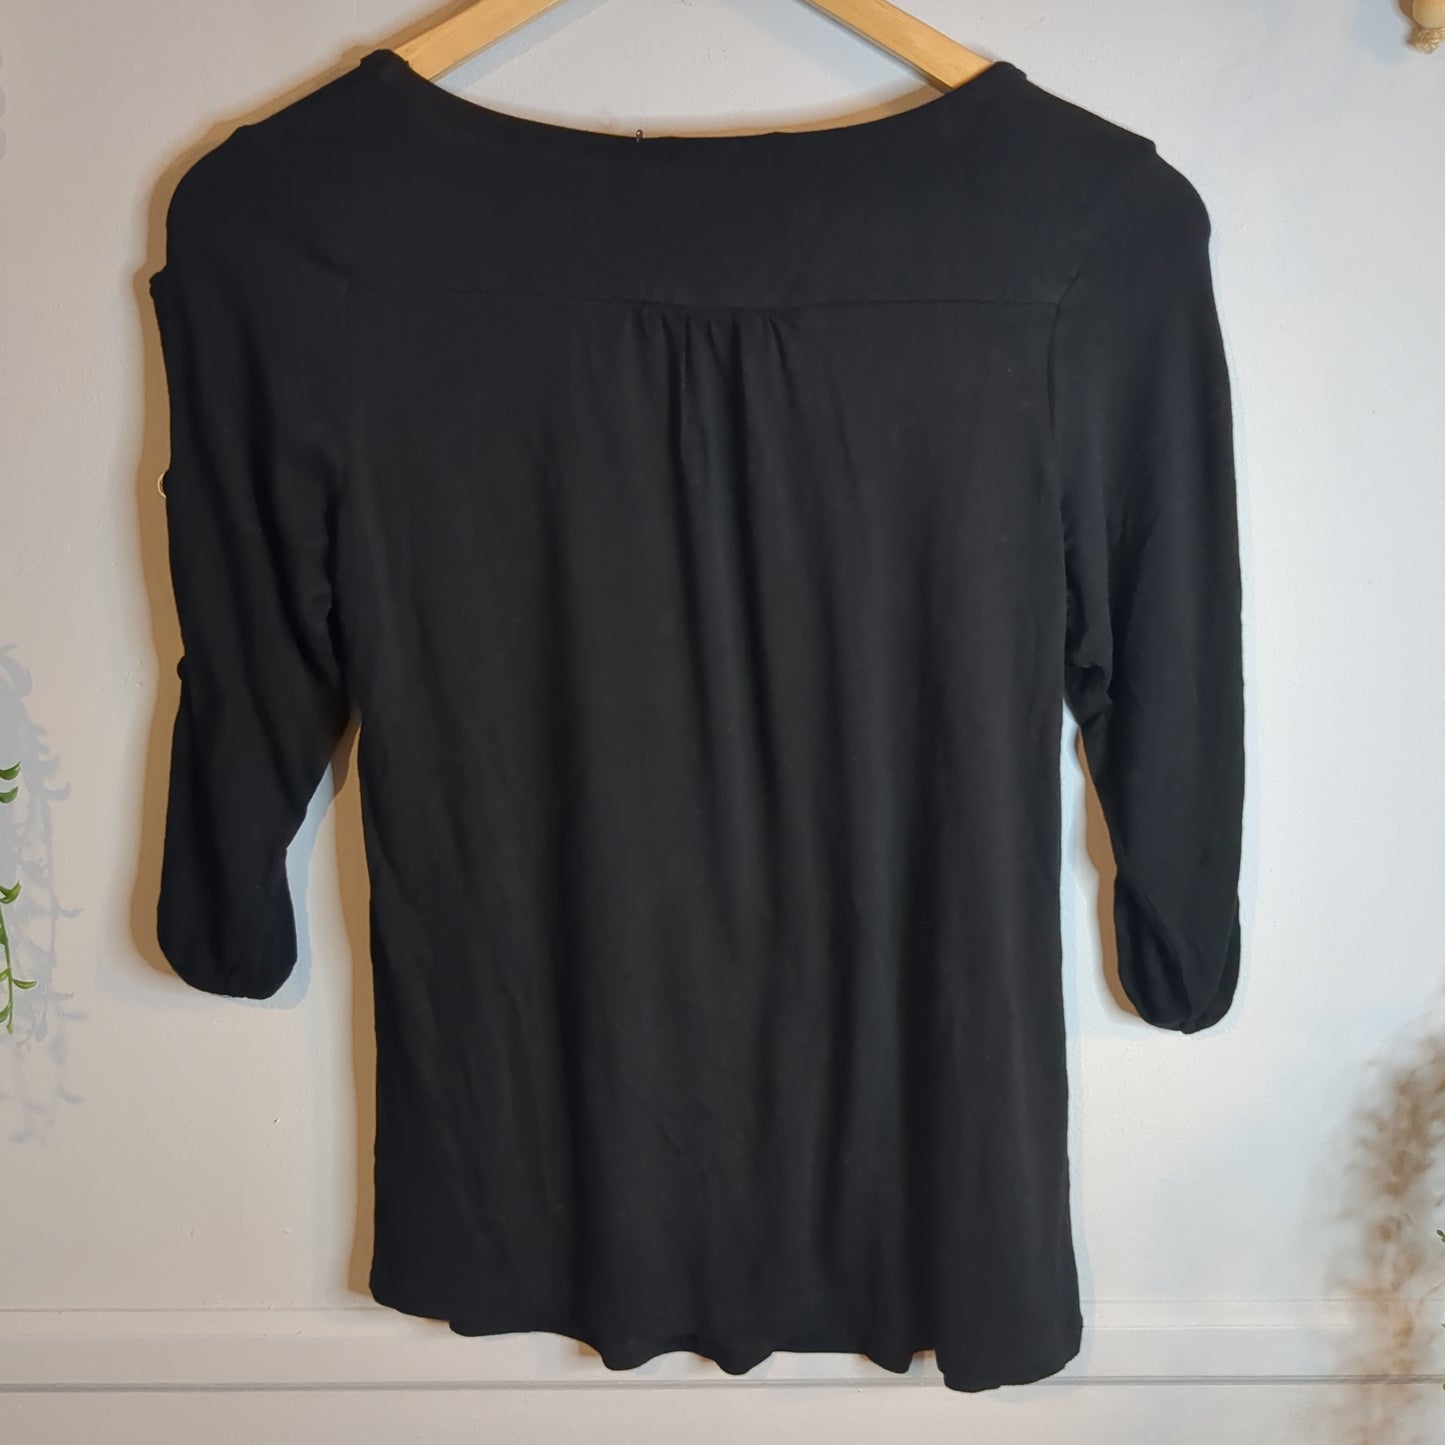 Babydoll round neck 3/4 blouse w/ gold buttons, Black